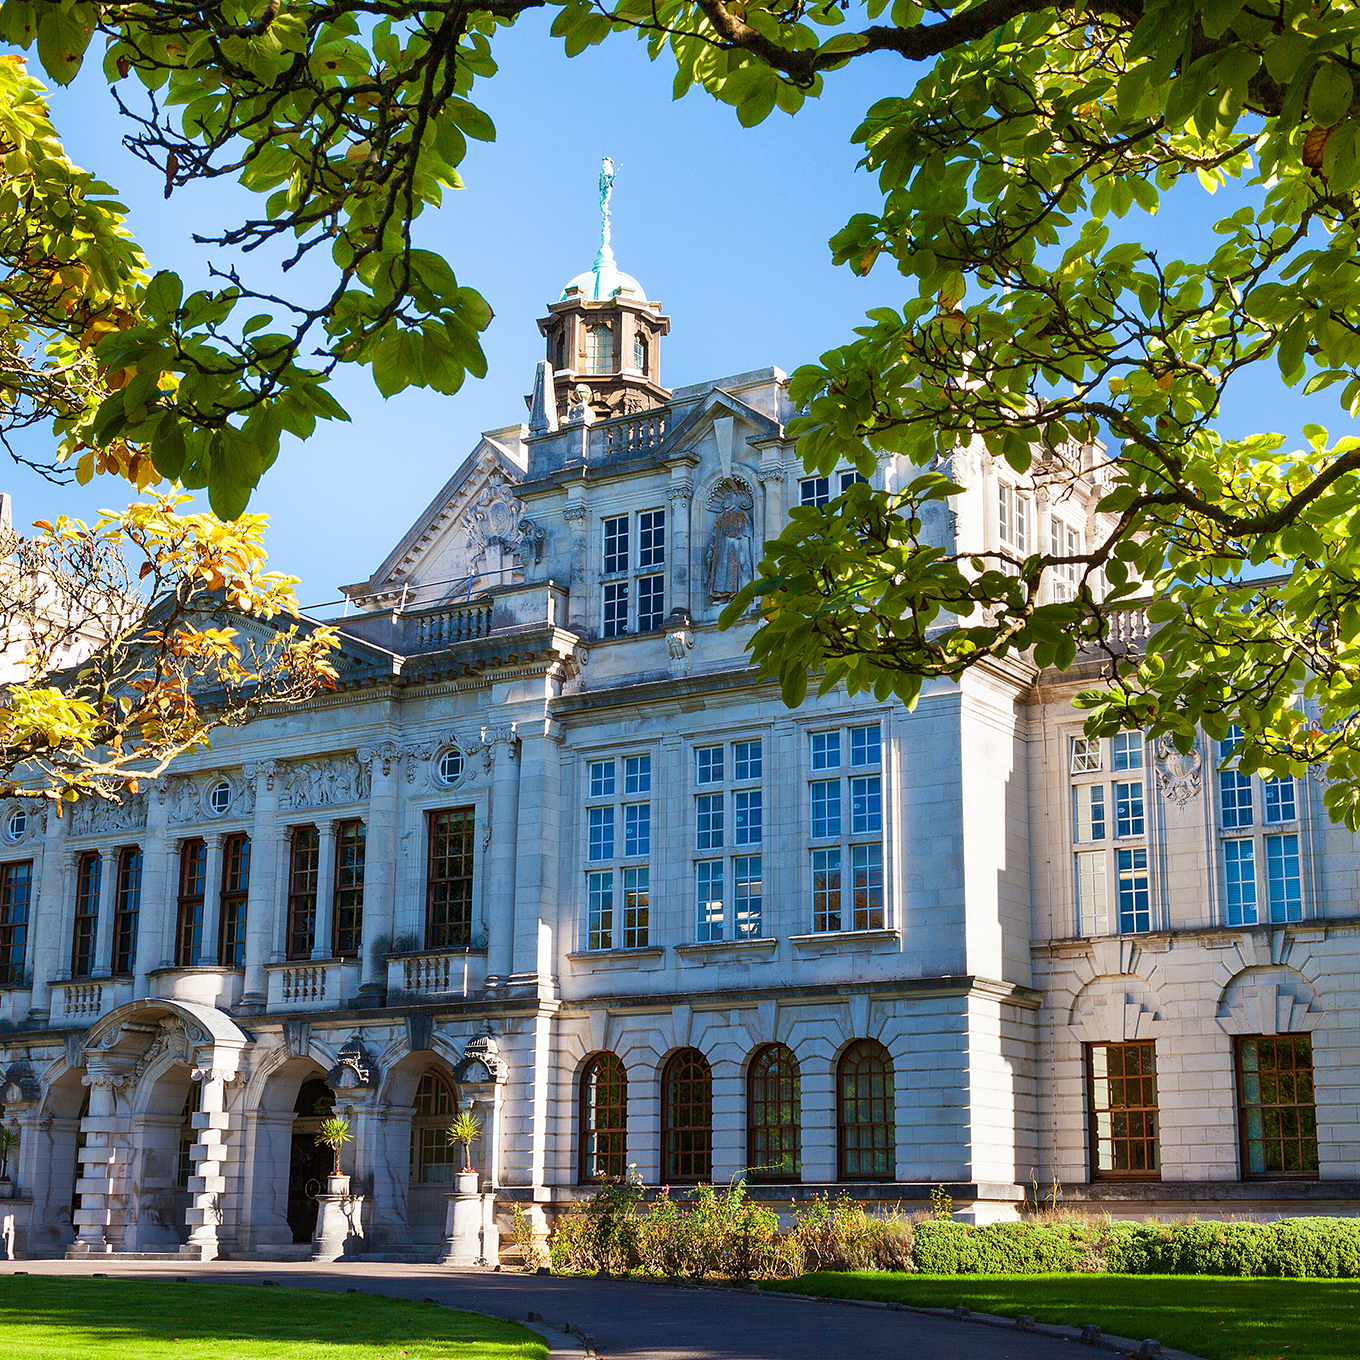 Centre for Student Life - Visitor information - Cardiff University